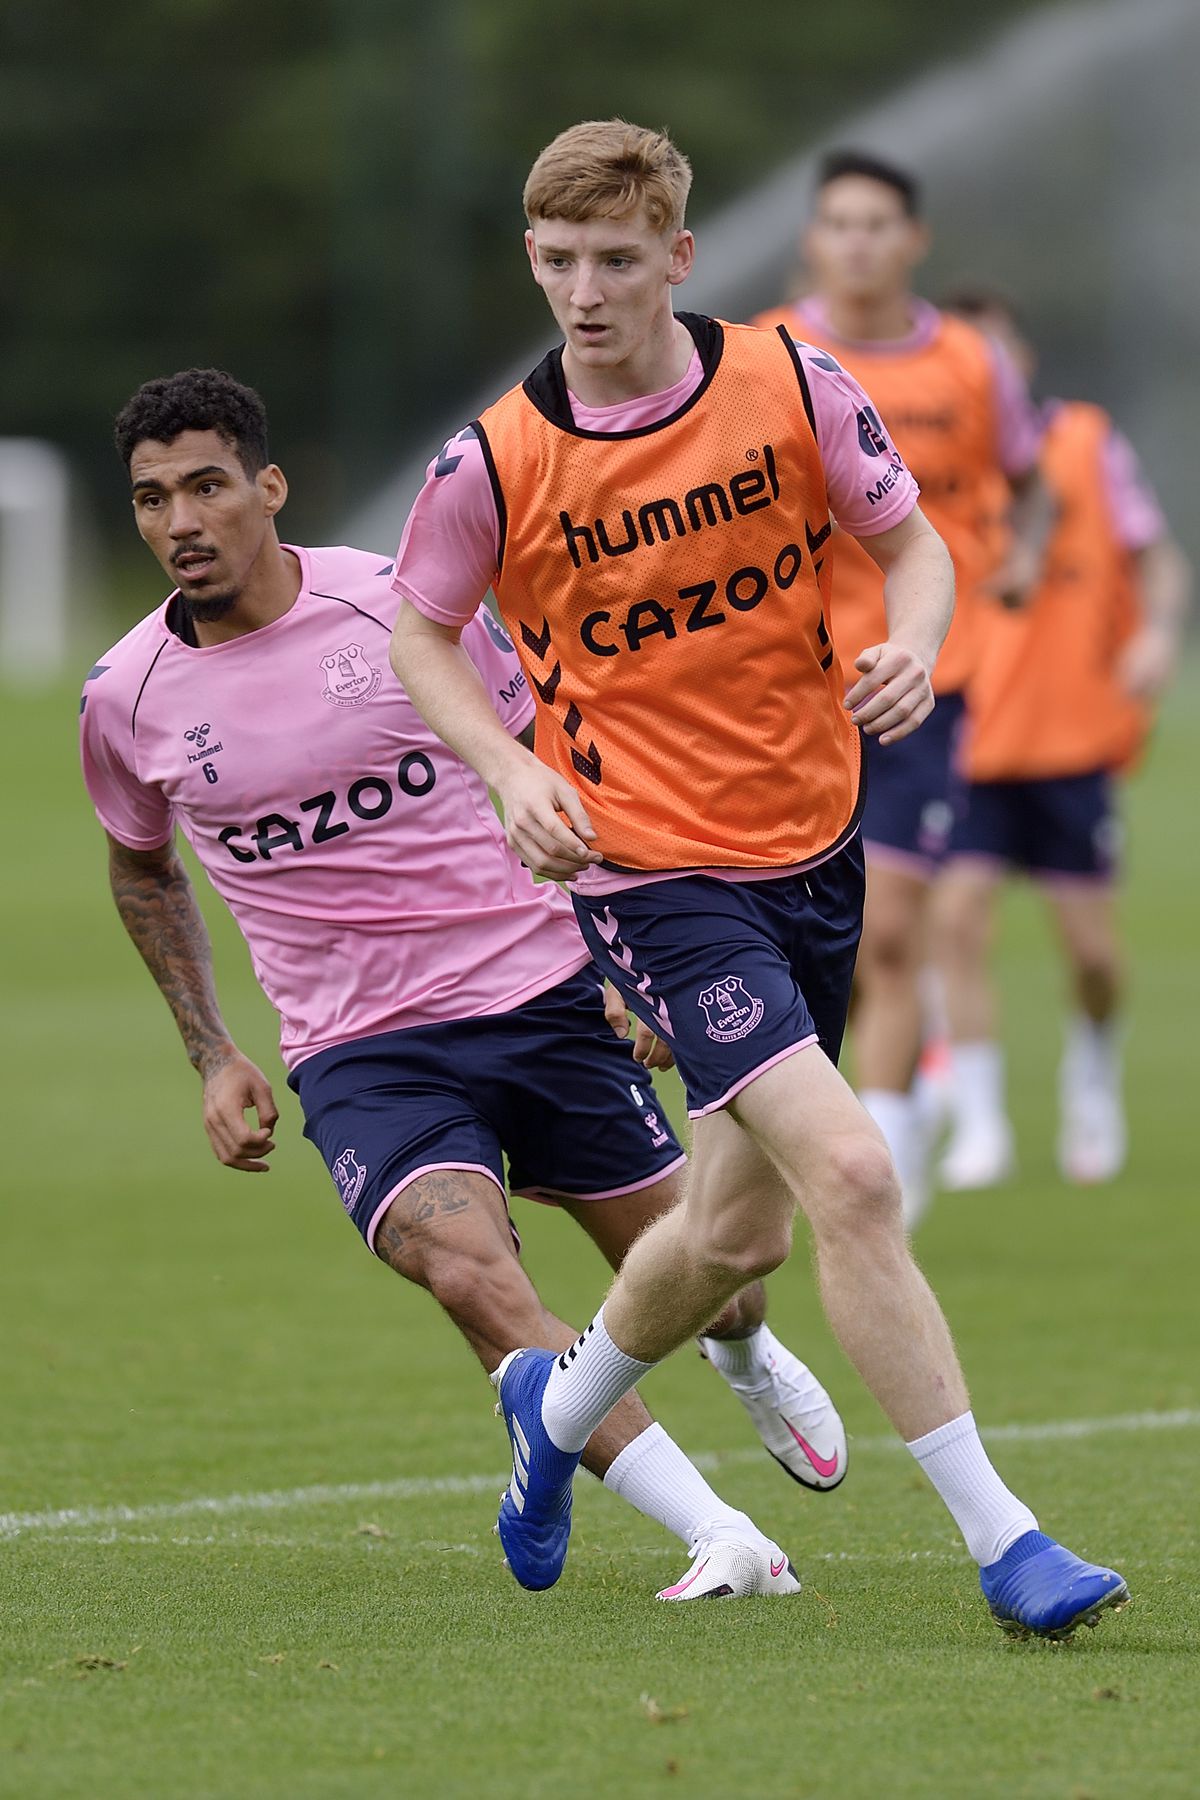 James Rodriguez and Allan take Part in Their First Training Session at Everton